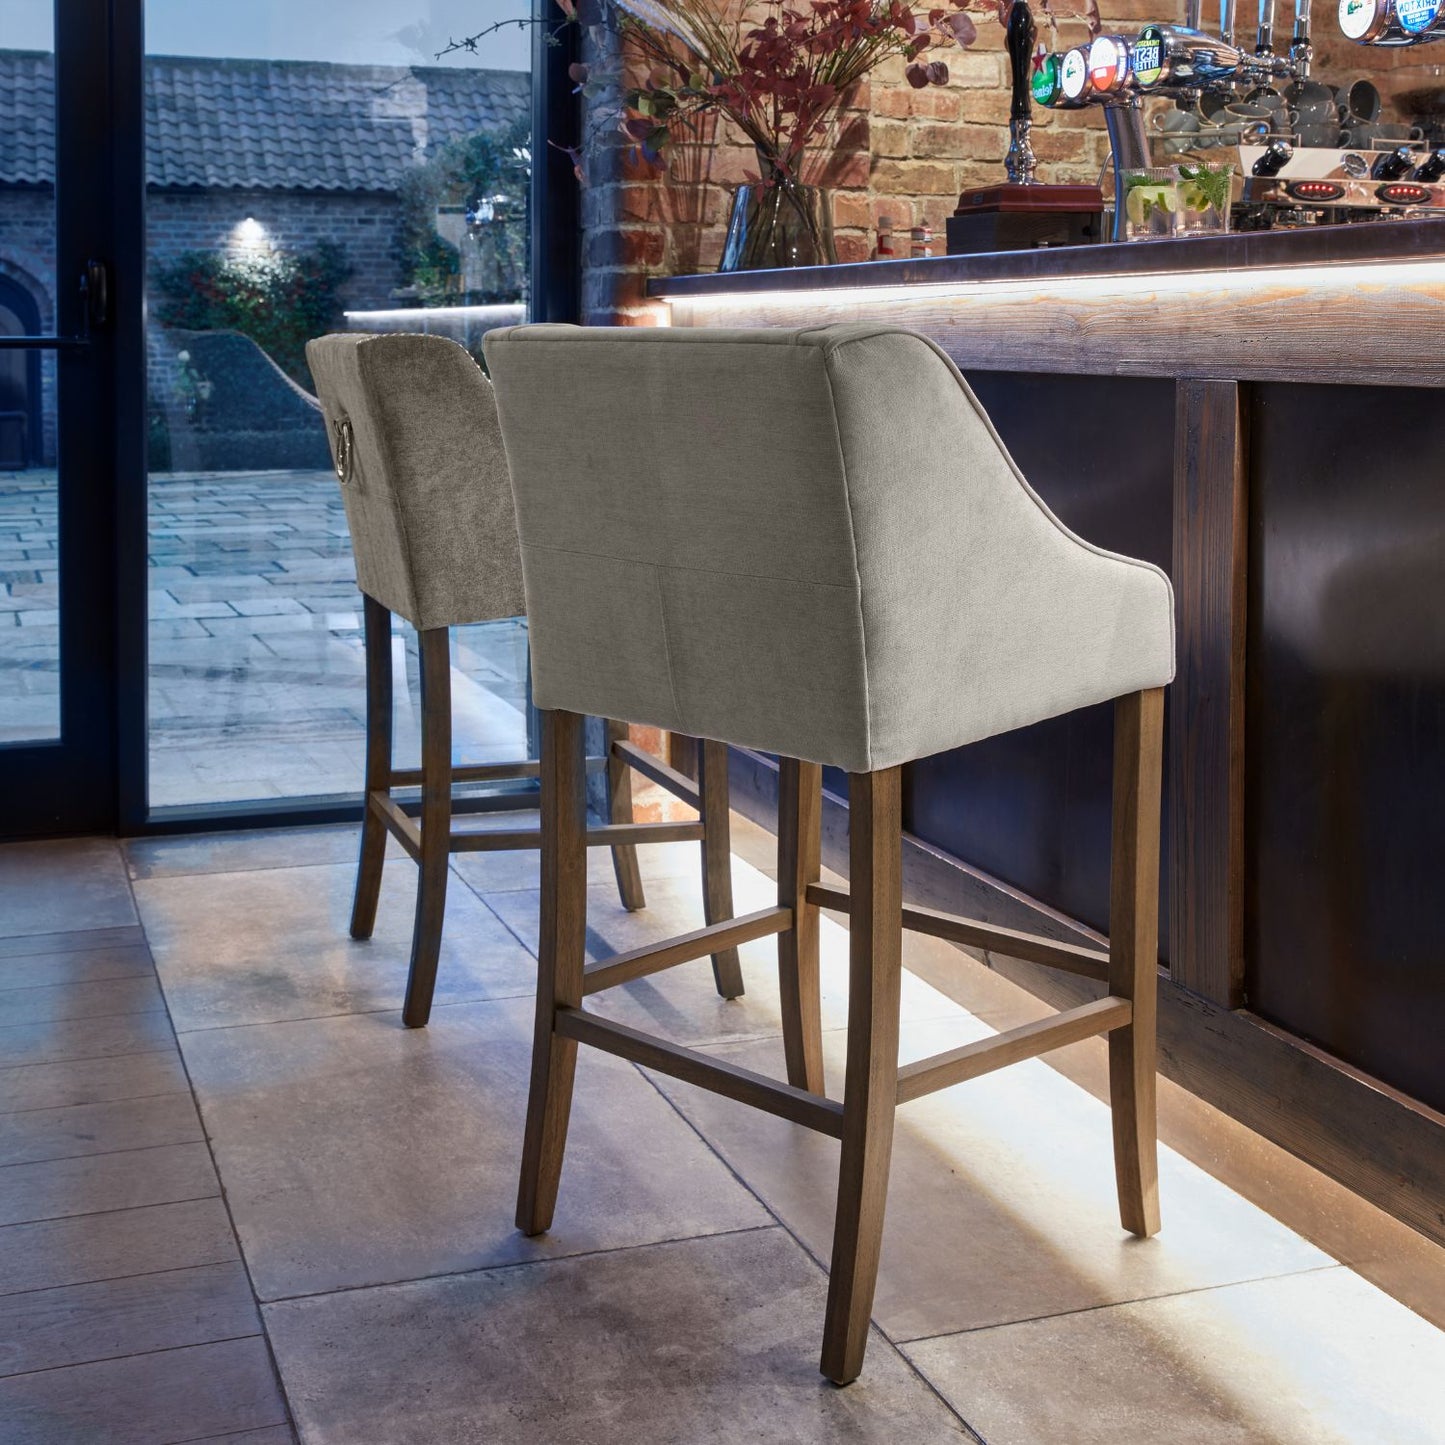 Light Grey Fabric High Back Bar Stool with Wooden Legs